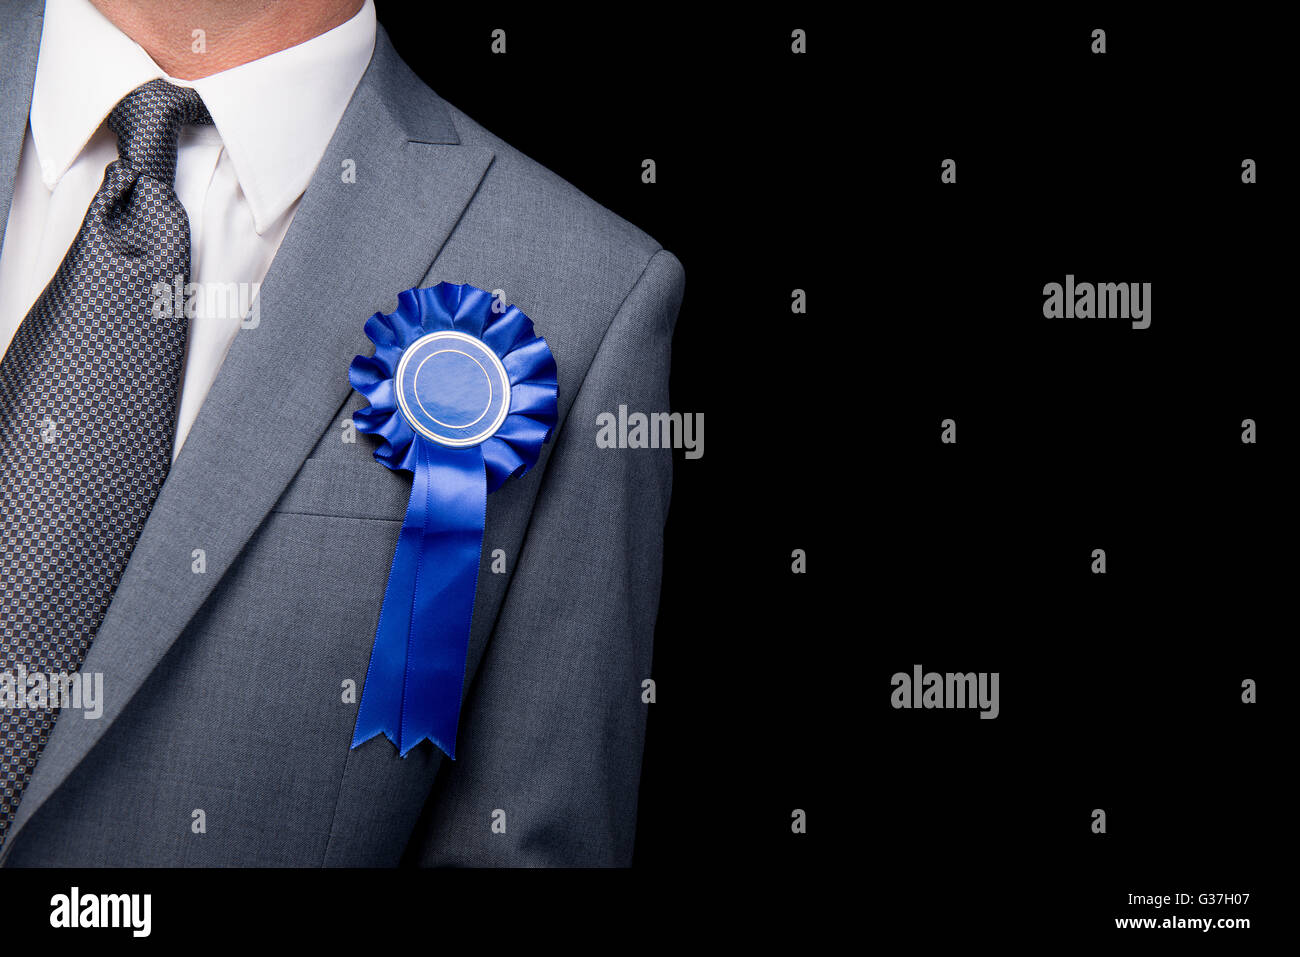 Head and shoulders view, of election candidate wearing a blue rosette, against a black background. Stock Photo